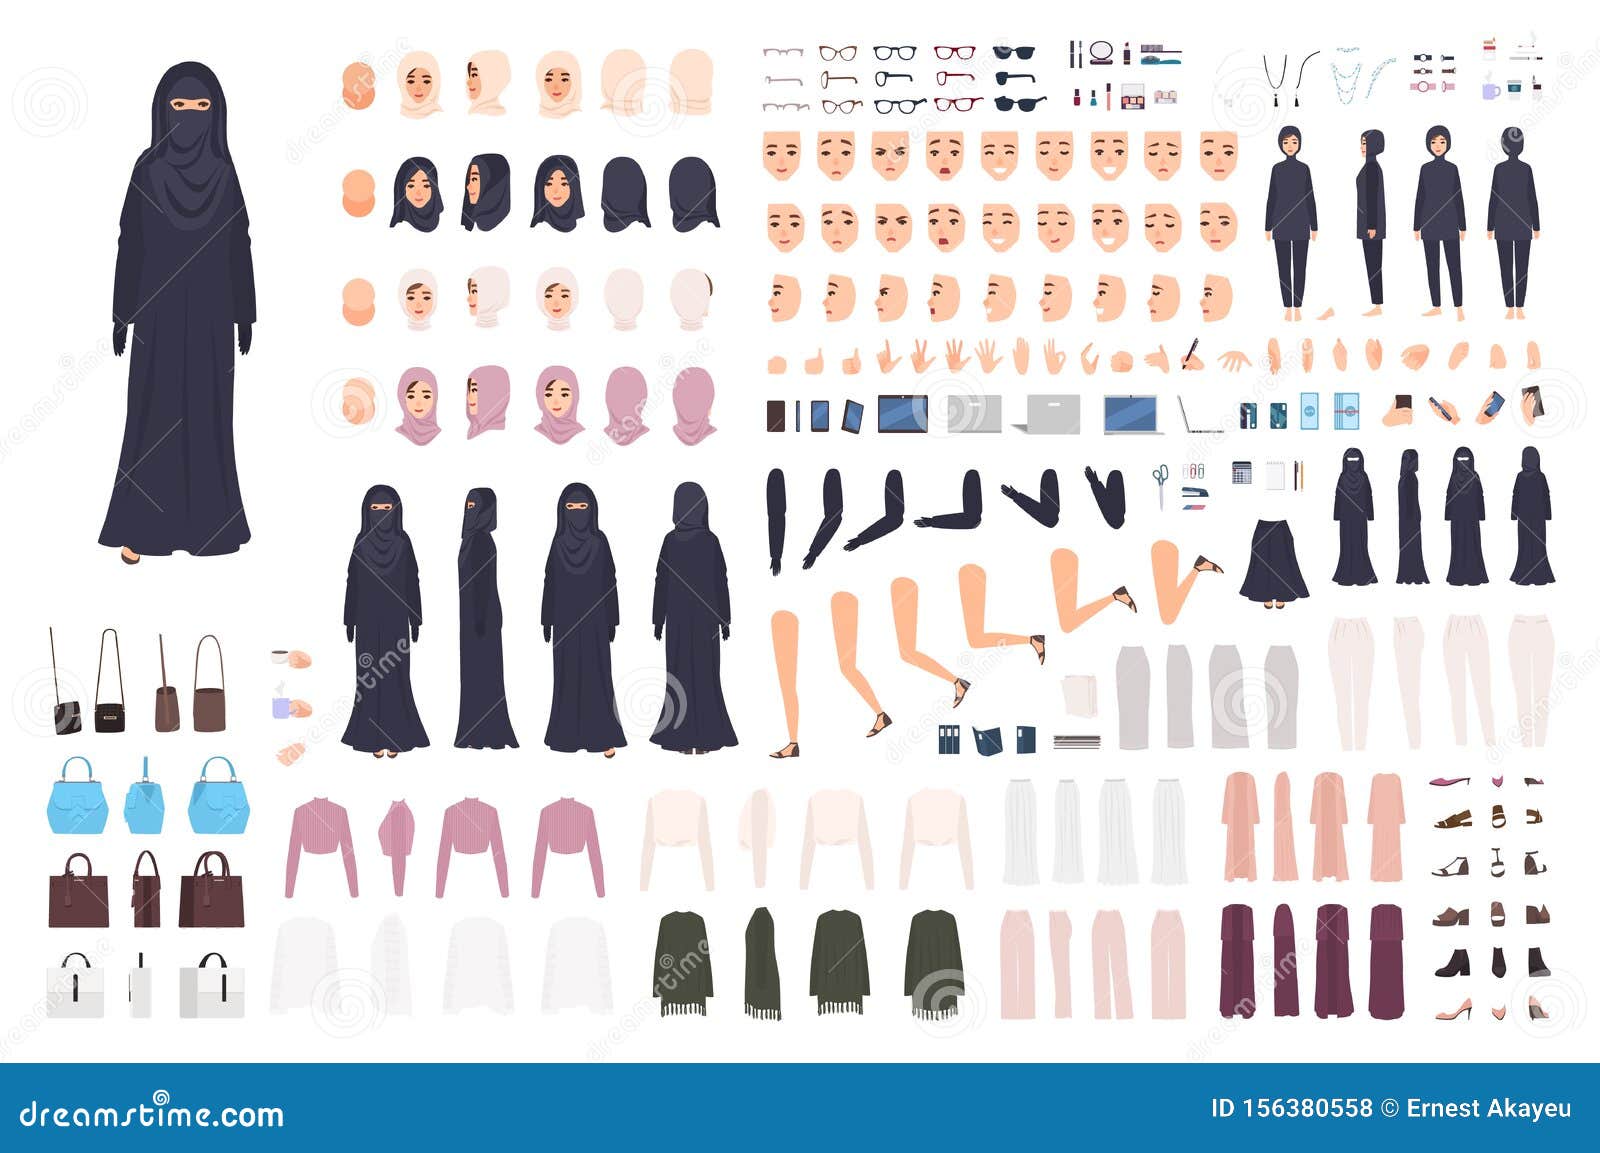 young arab woman in burqa constructor set or animation kit. bundle of female character body parts, emotions, traditional